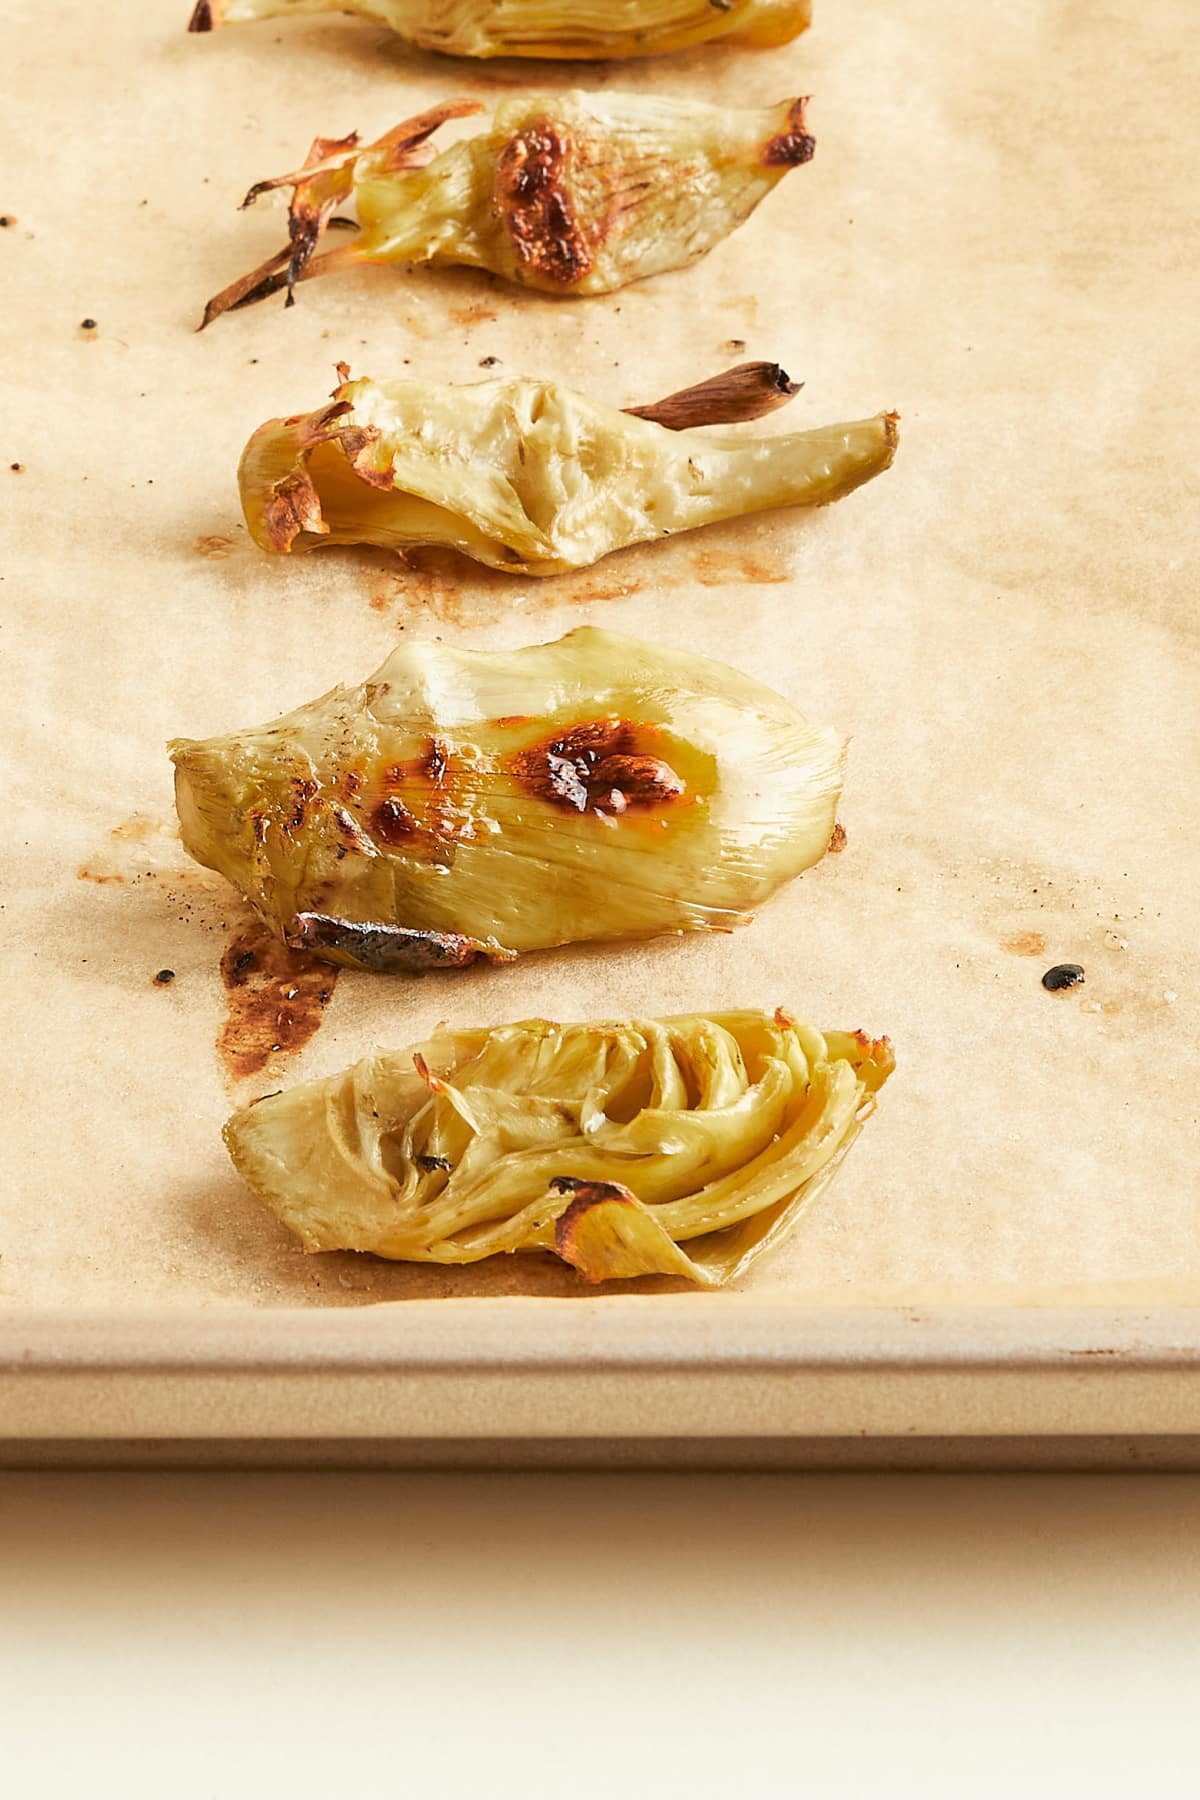 Roasted artichoke hearts lined up in a row on a parchment lined baking sheet.